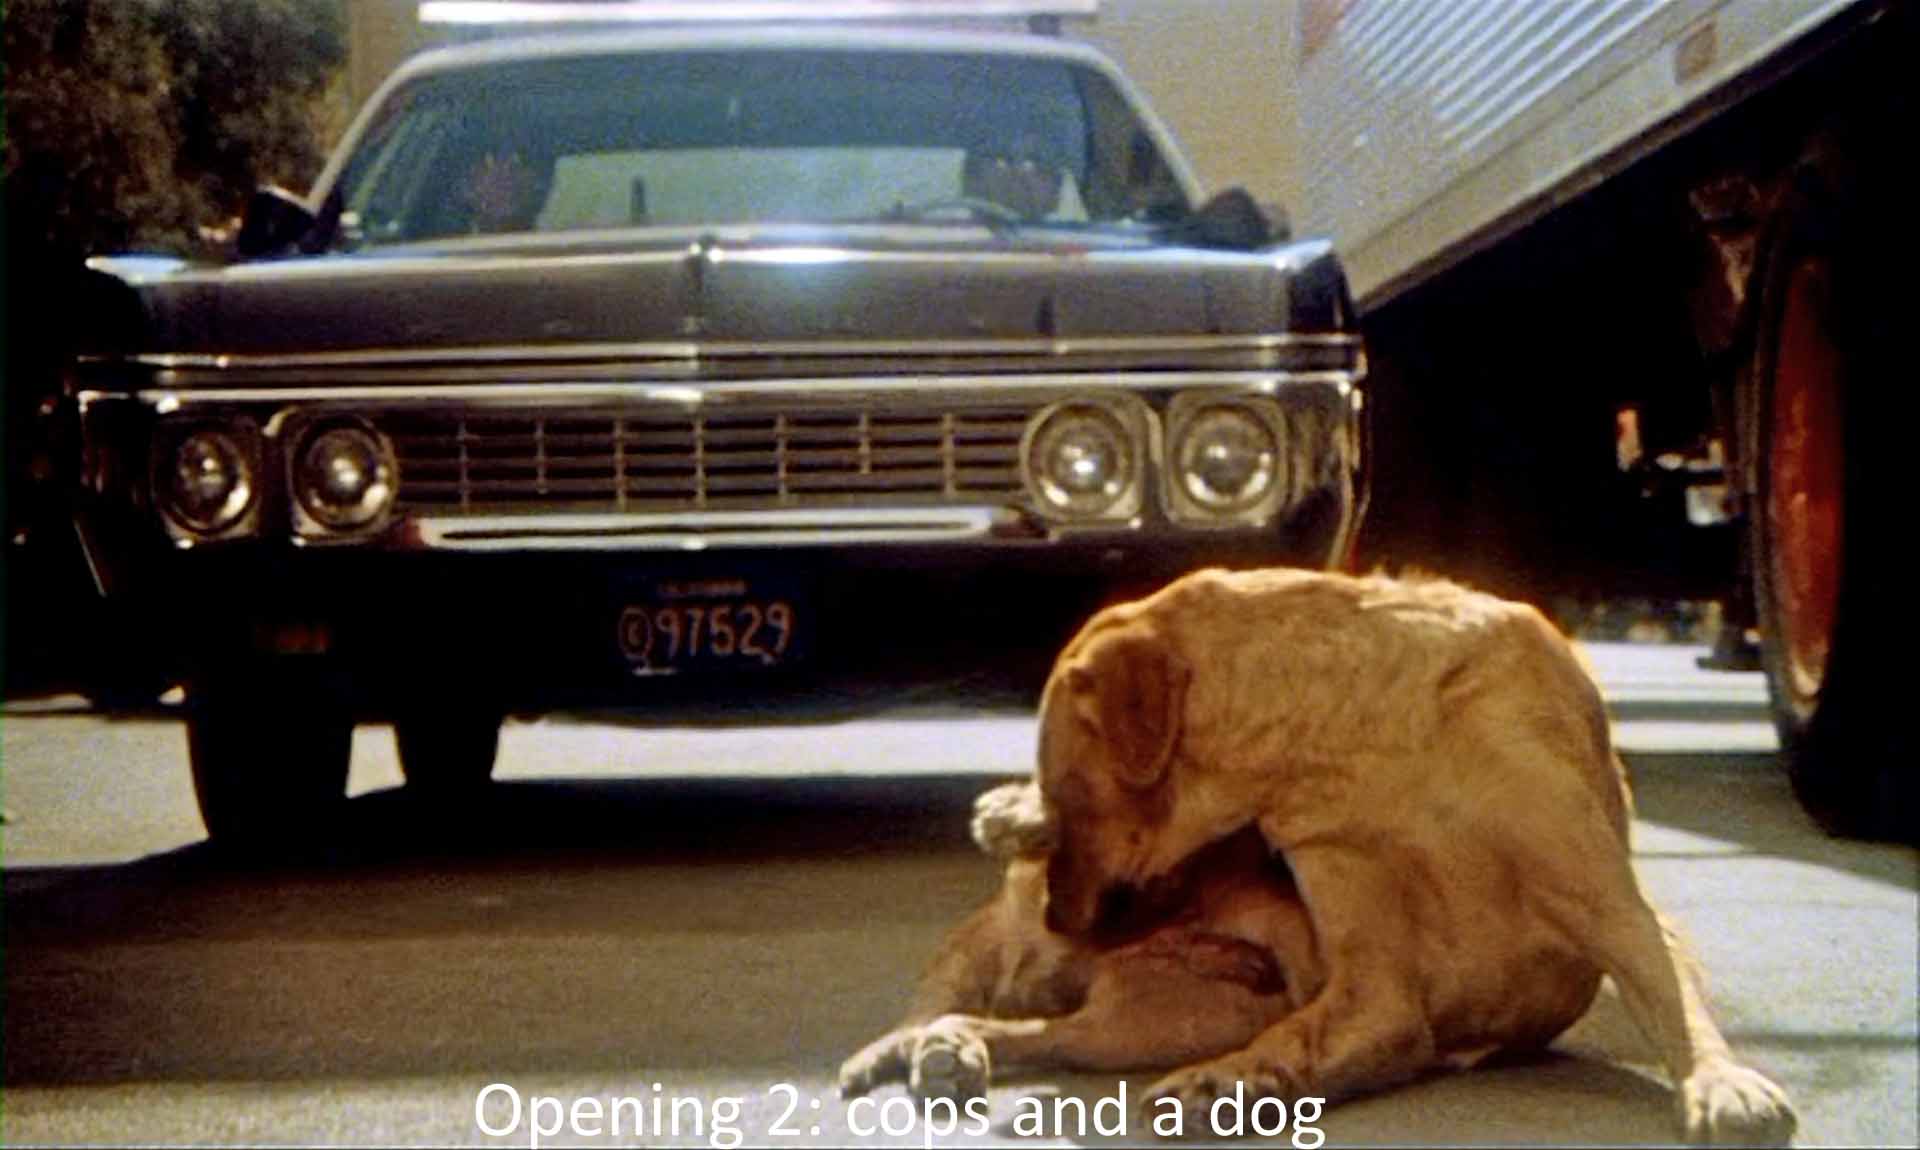 Opening 2: cops and a dog